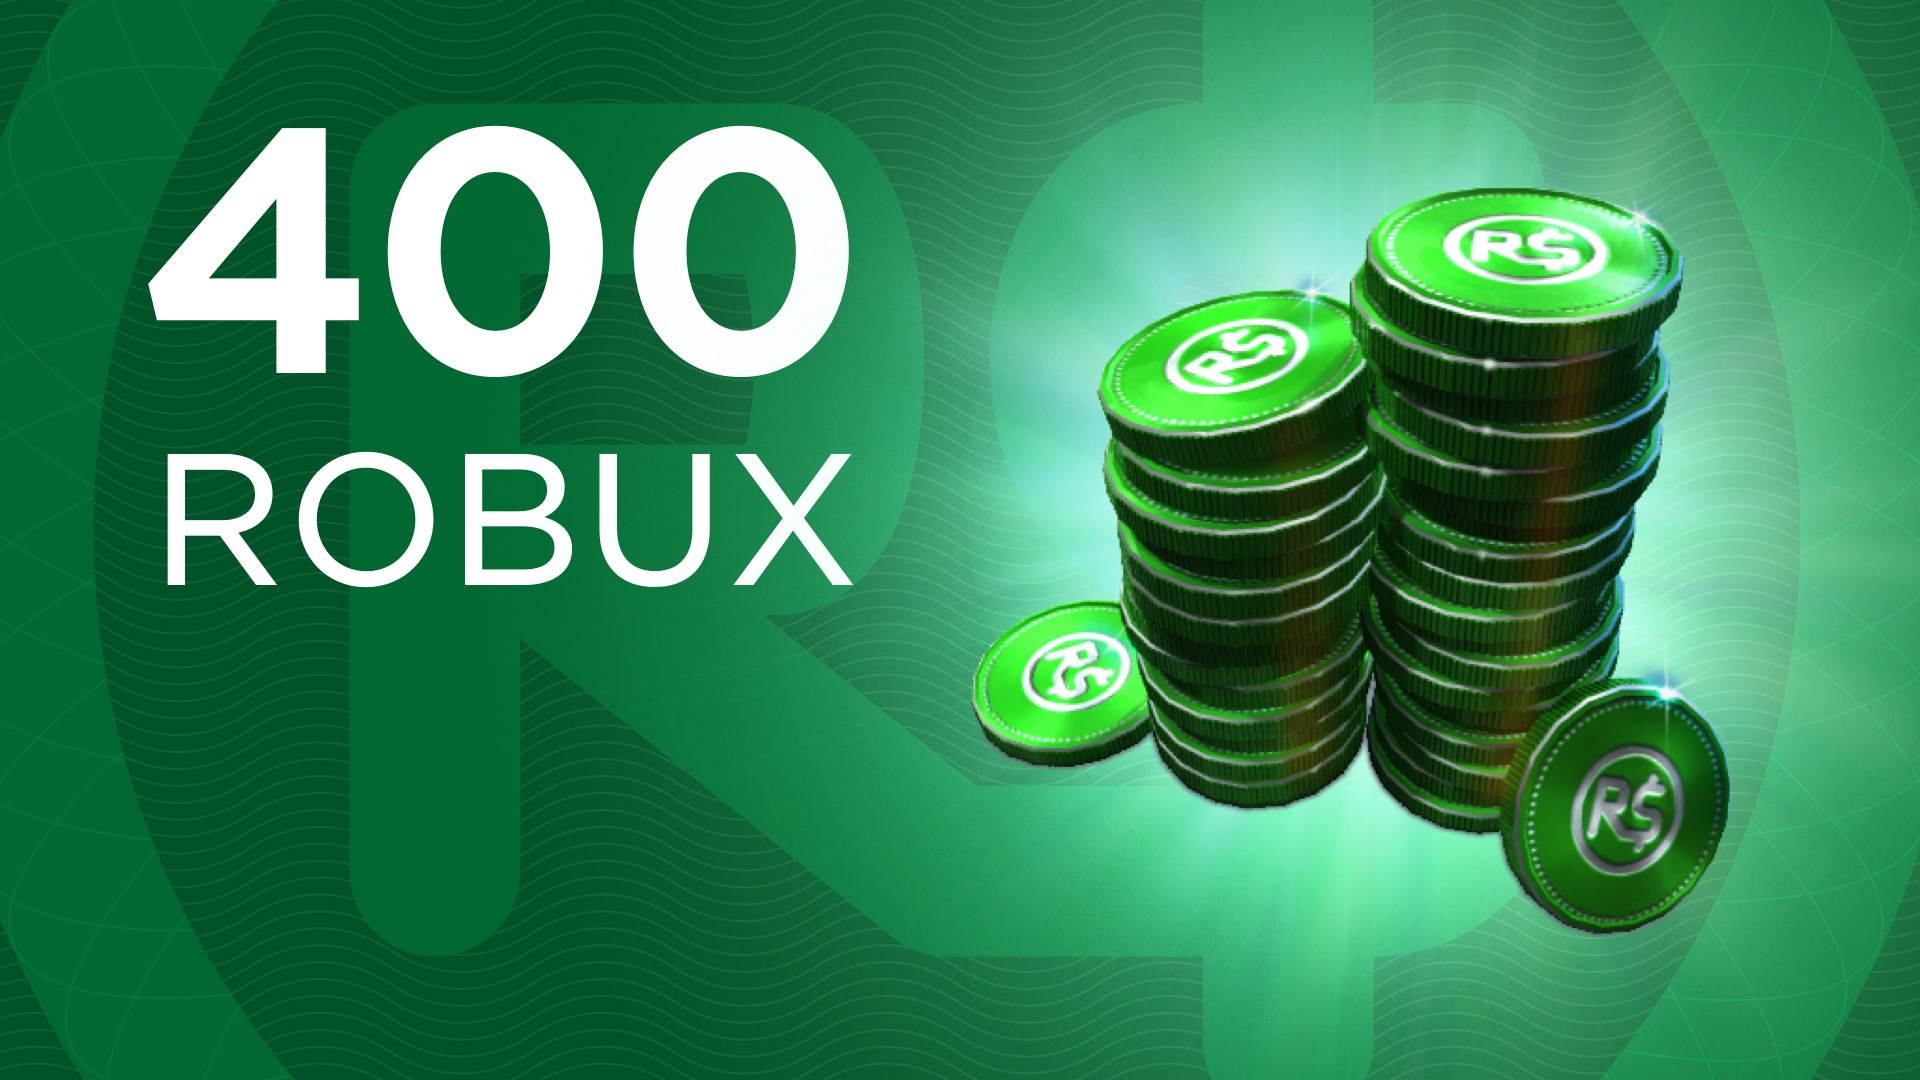 Buy 400 Robux For Xbox Microsoft Store - 400 robux for xbox